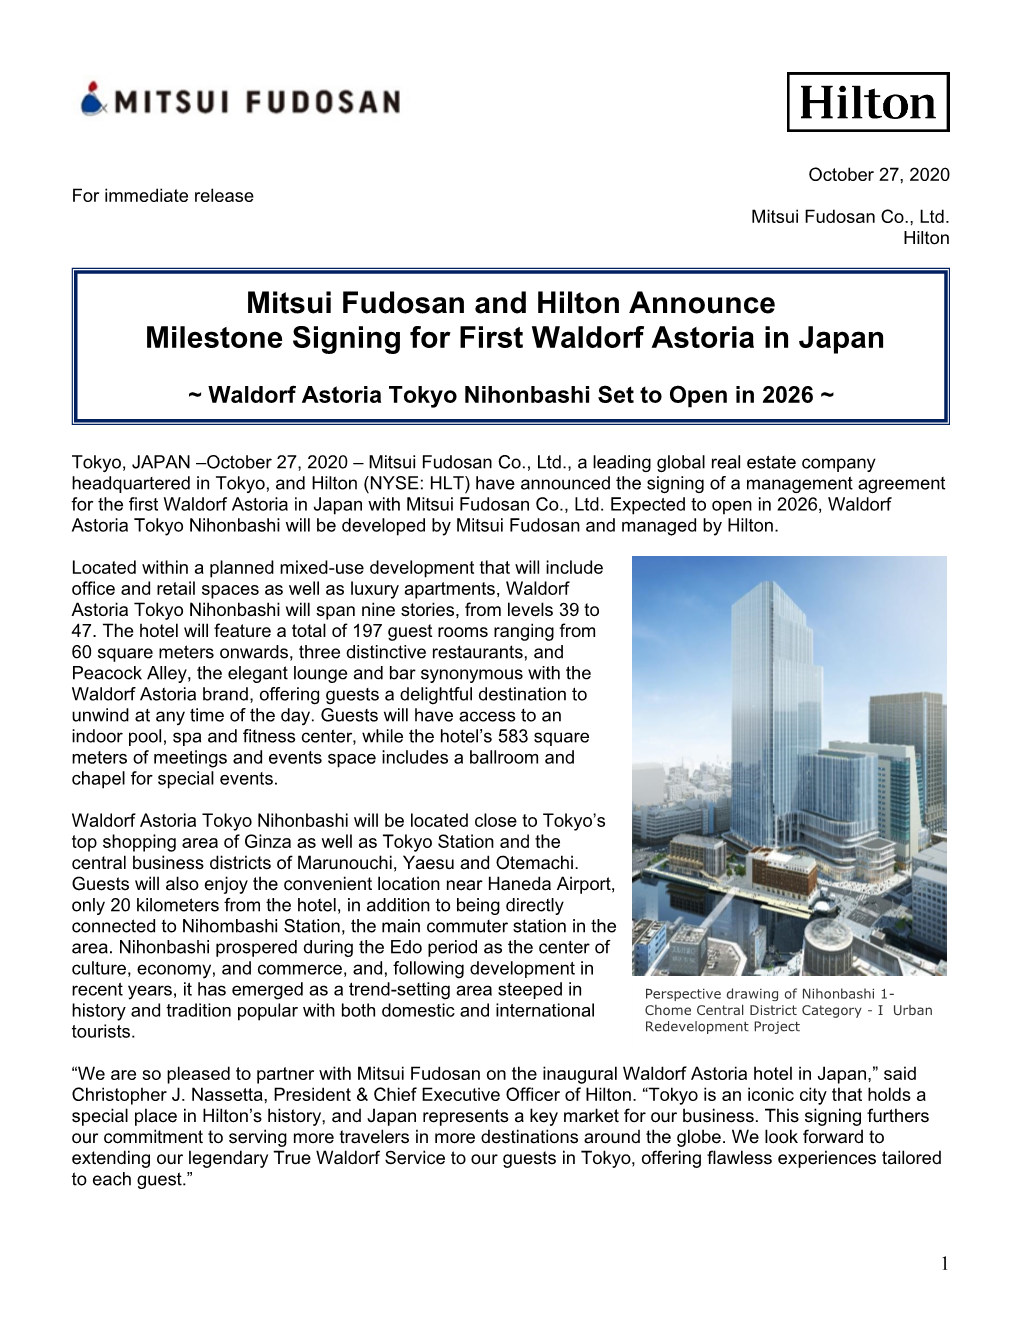 Mitsui Fudosan and Hilton Announce Milestone Signing for First Waldorf